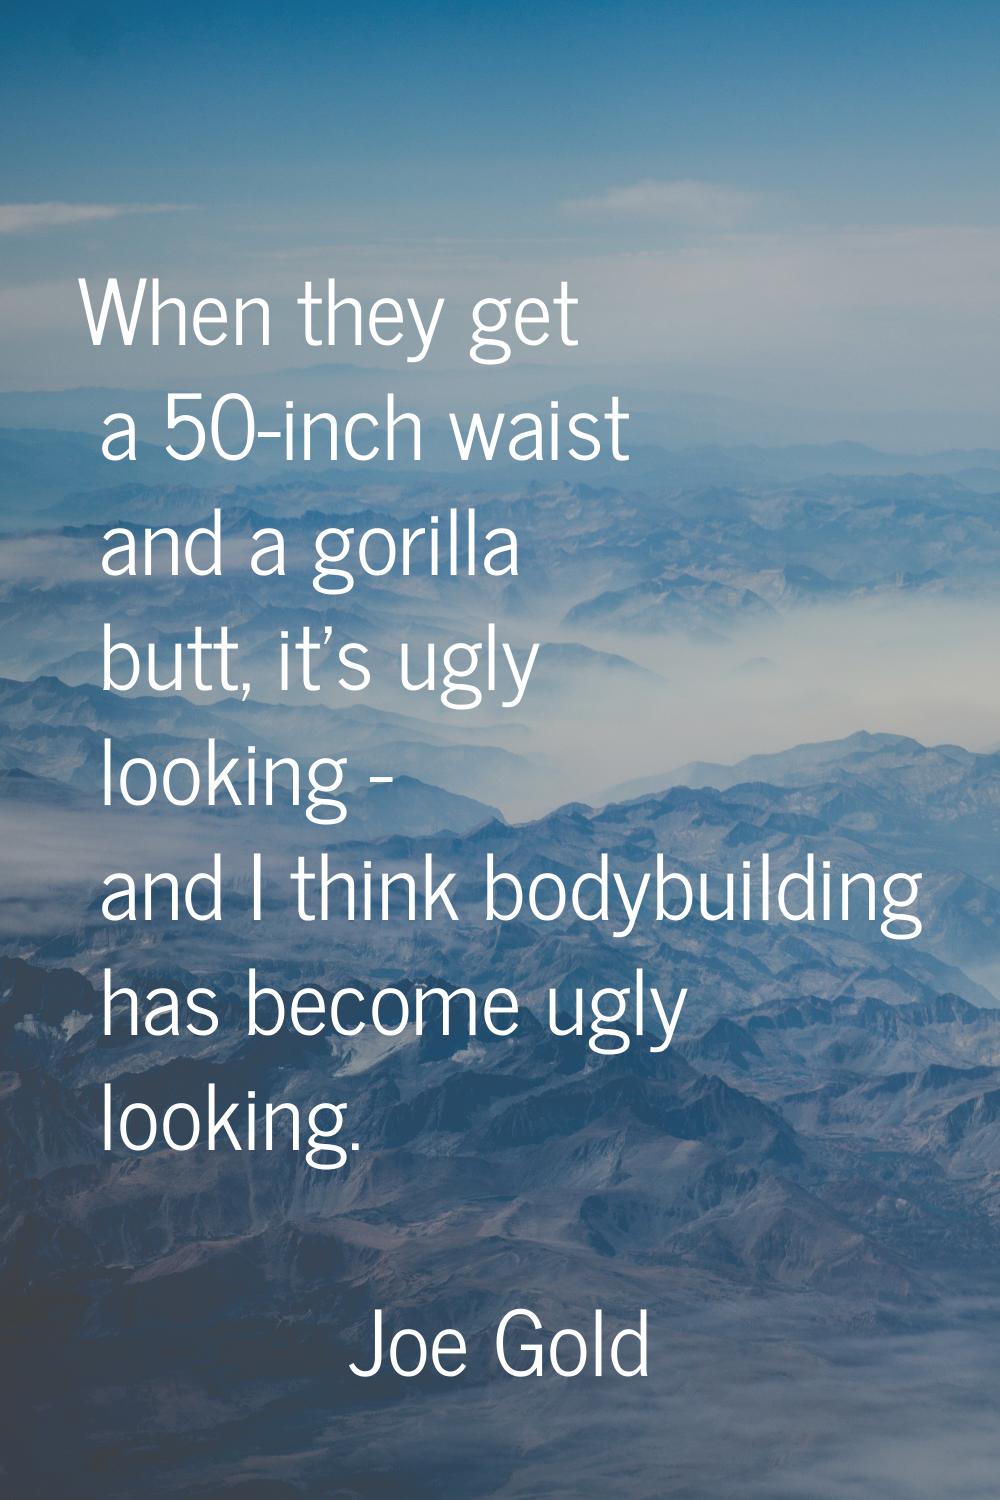 When they get a 50-inch waist and a gorilla butt, it's ugly looking - and I think bodybuilding has 